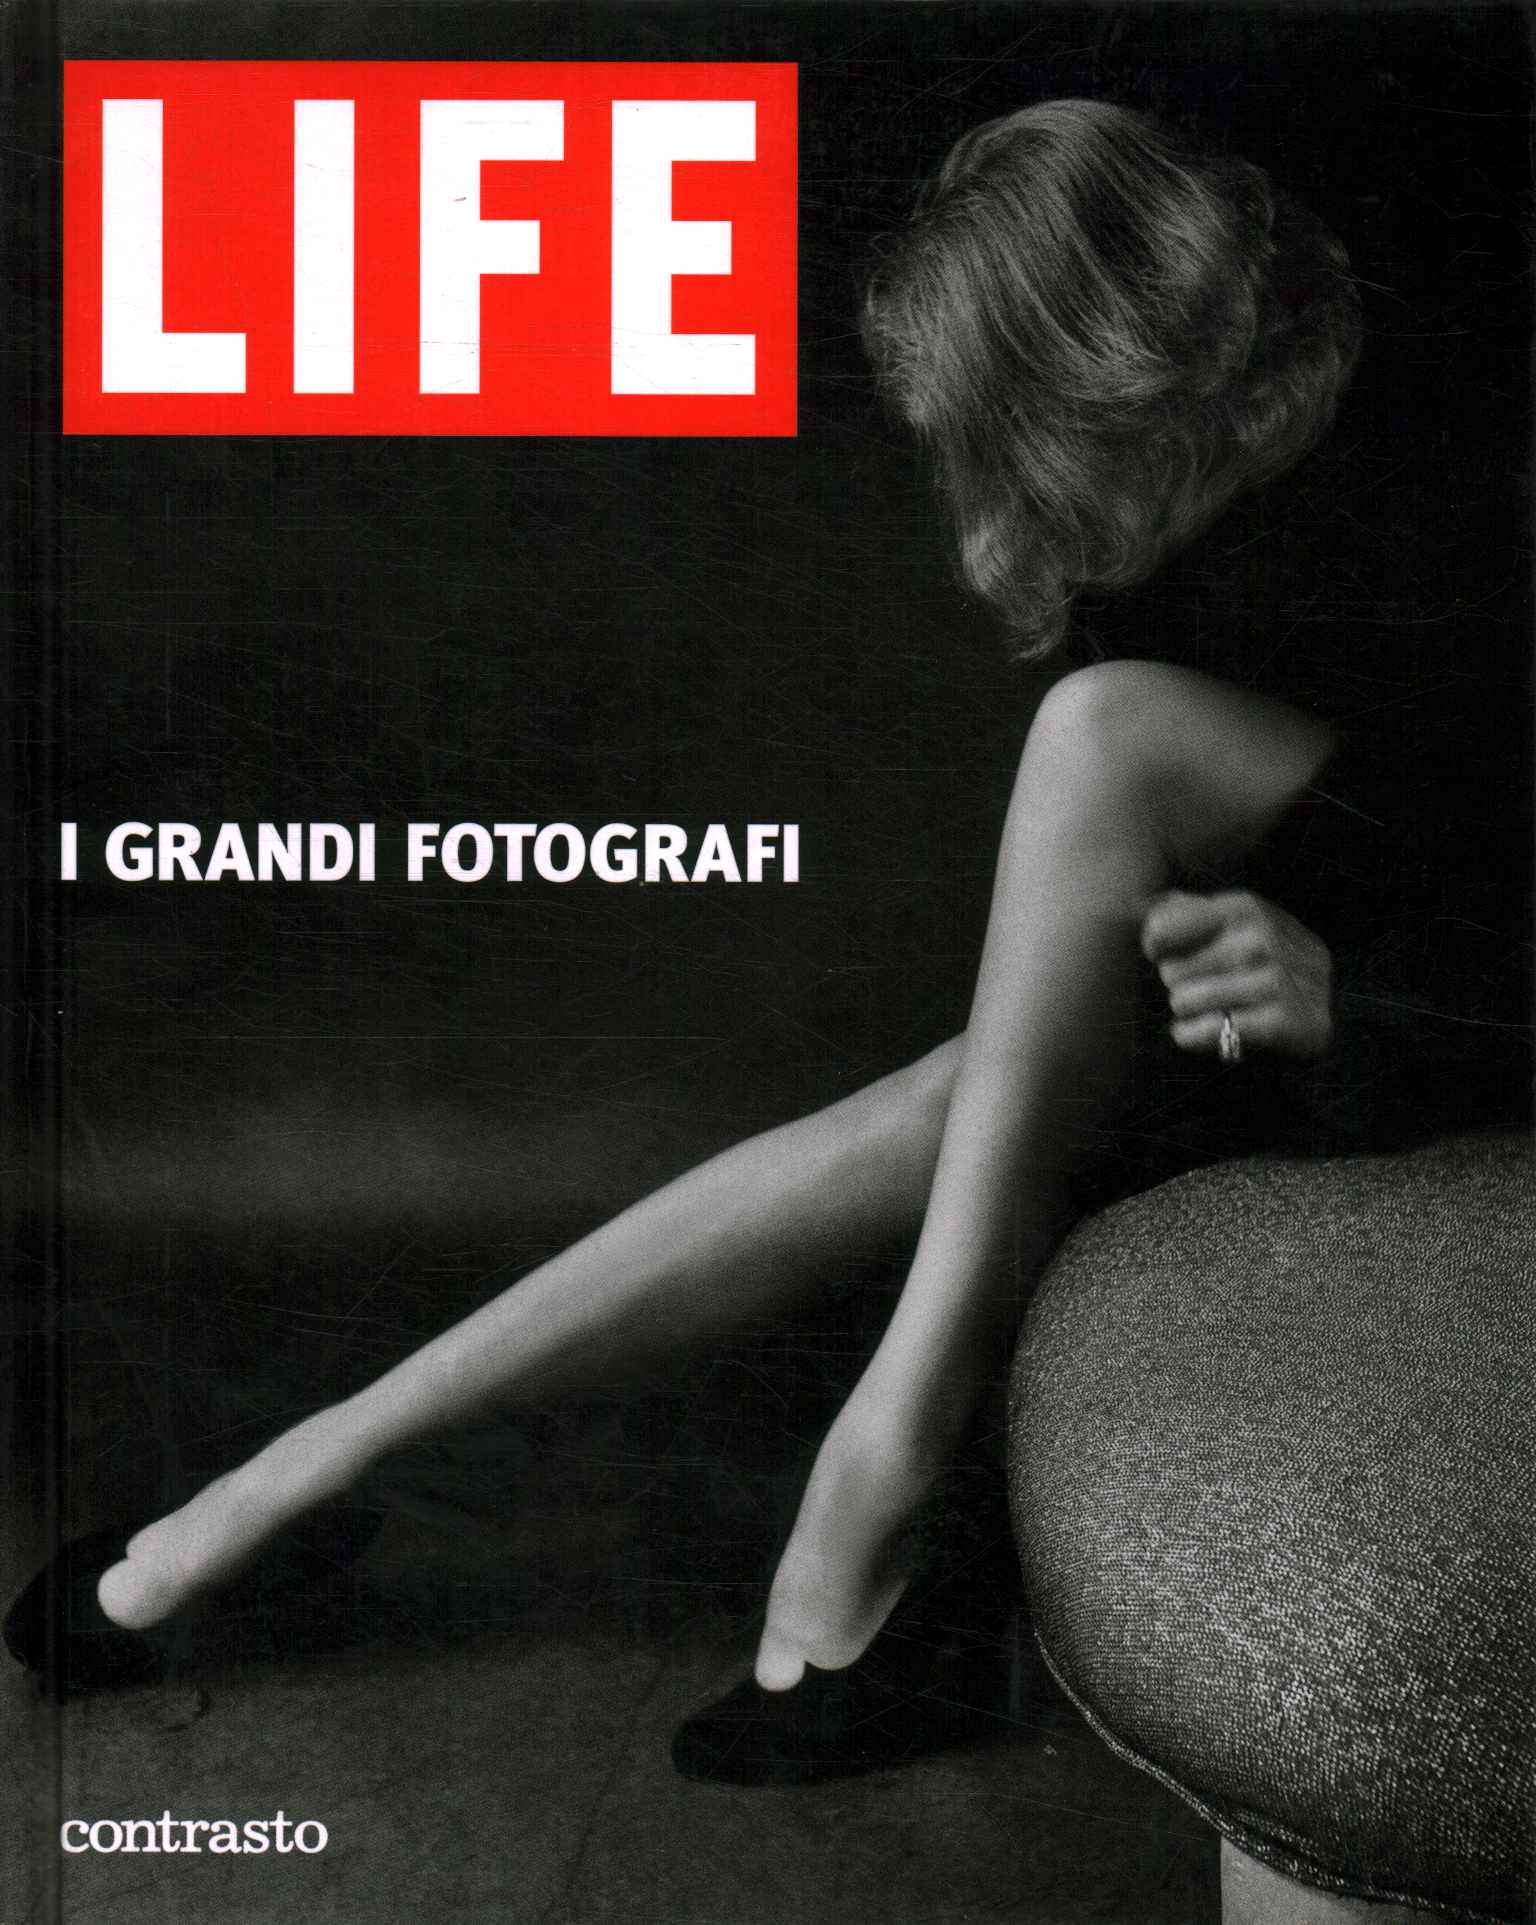 LIFE. The great photographers